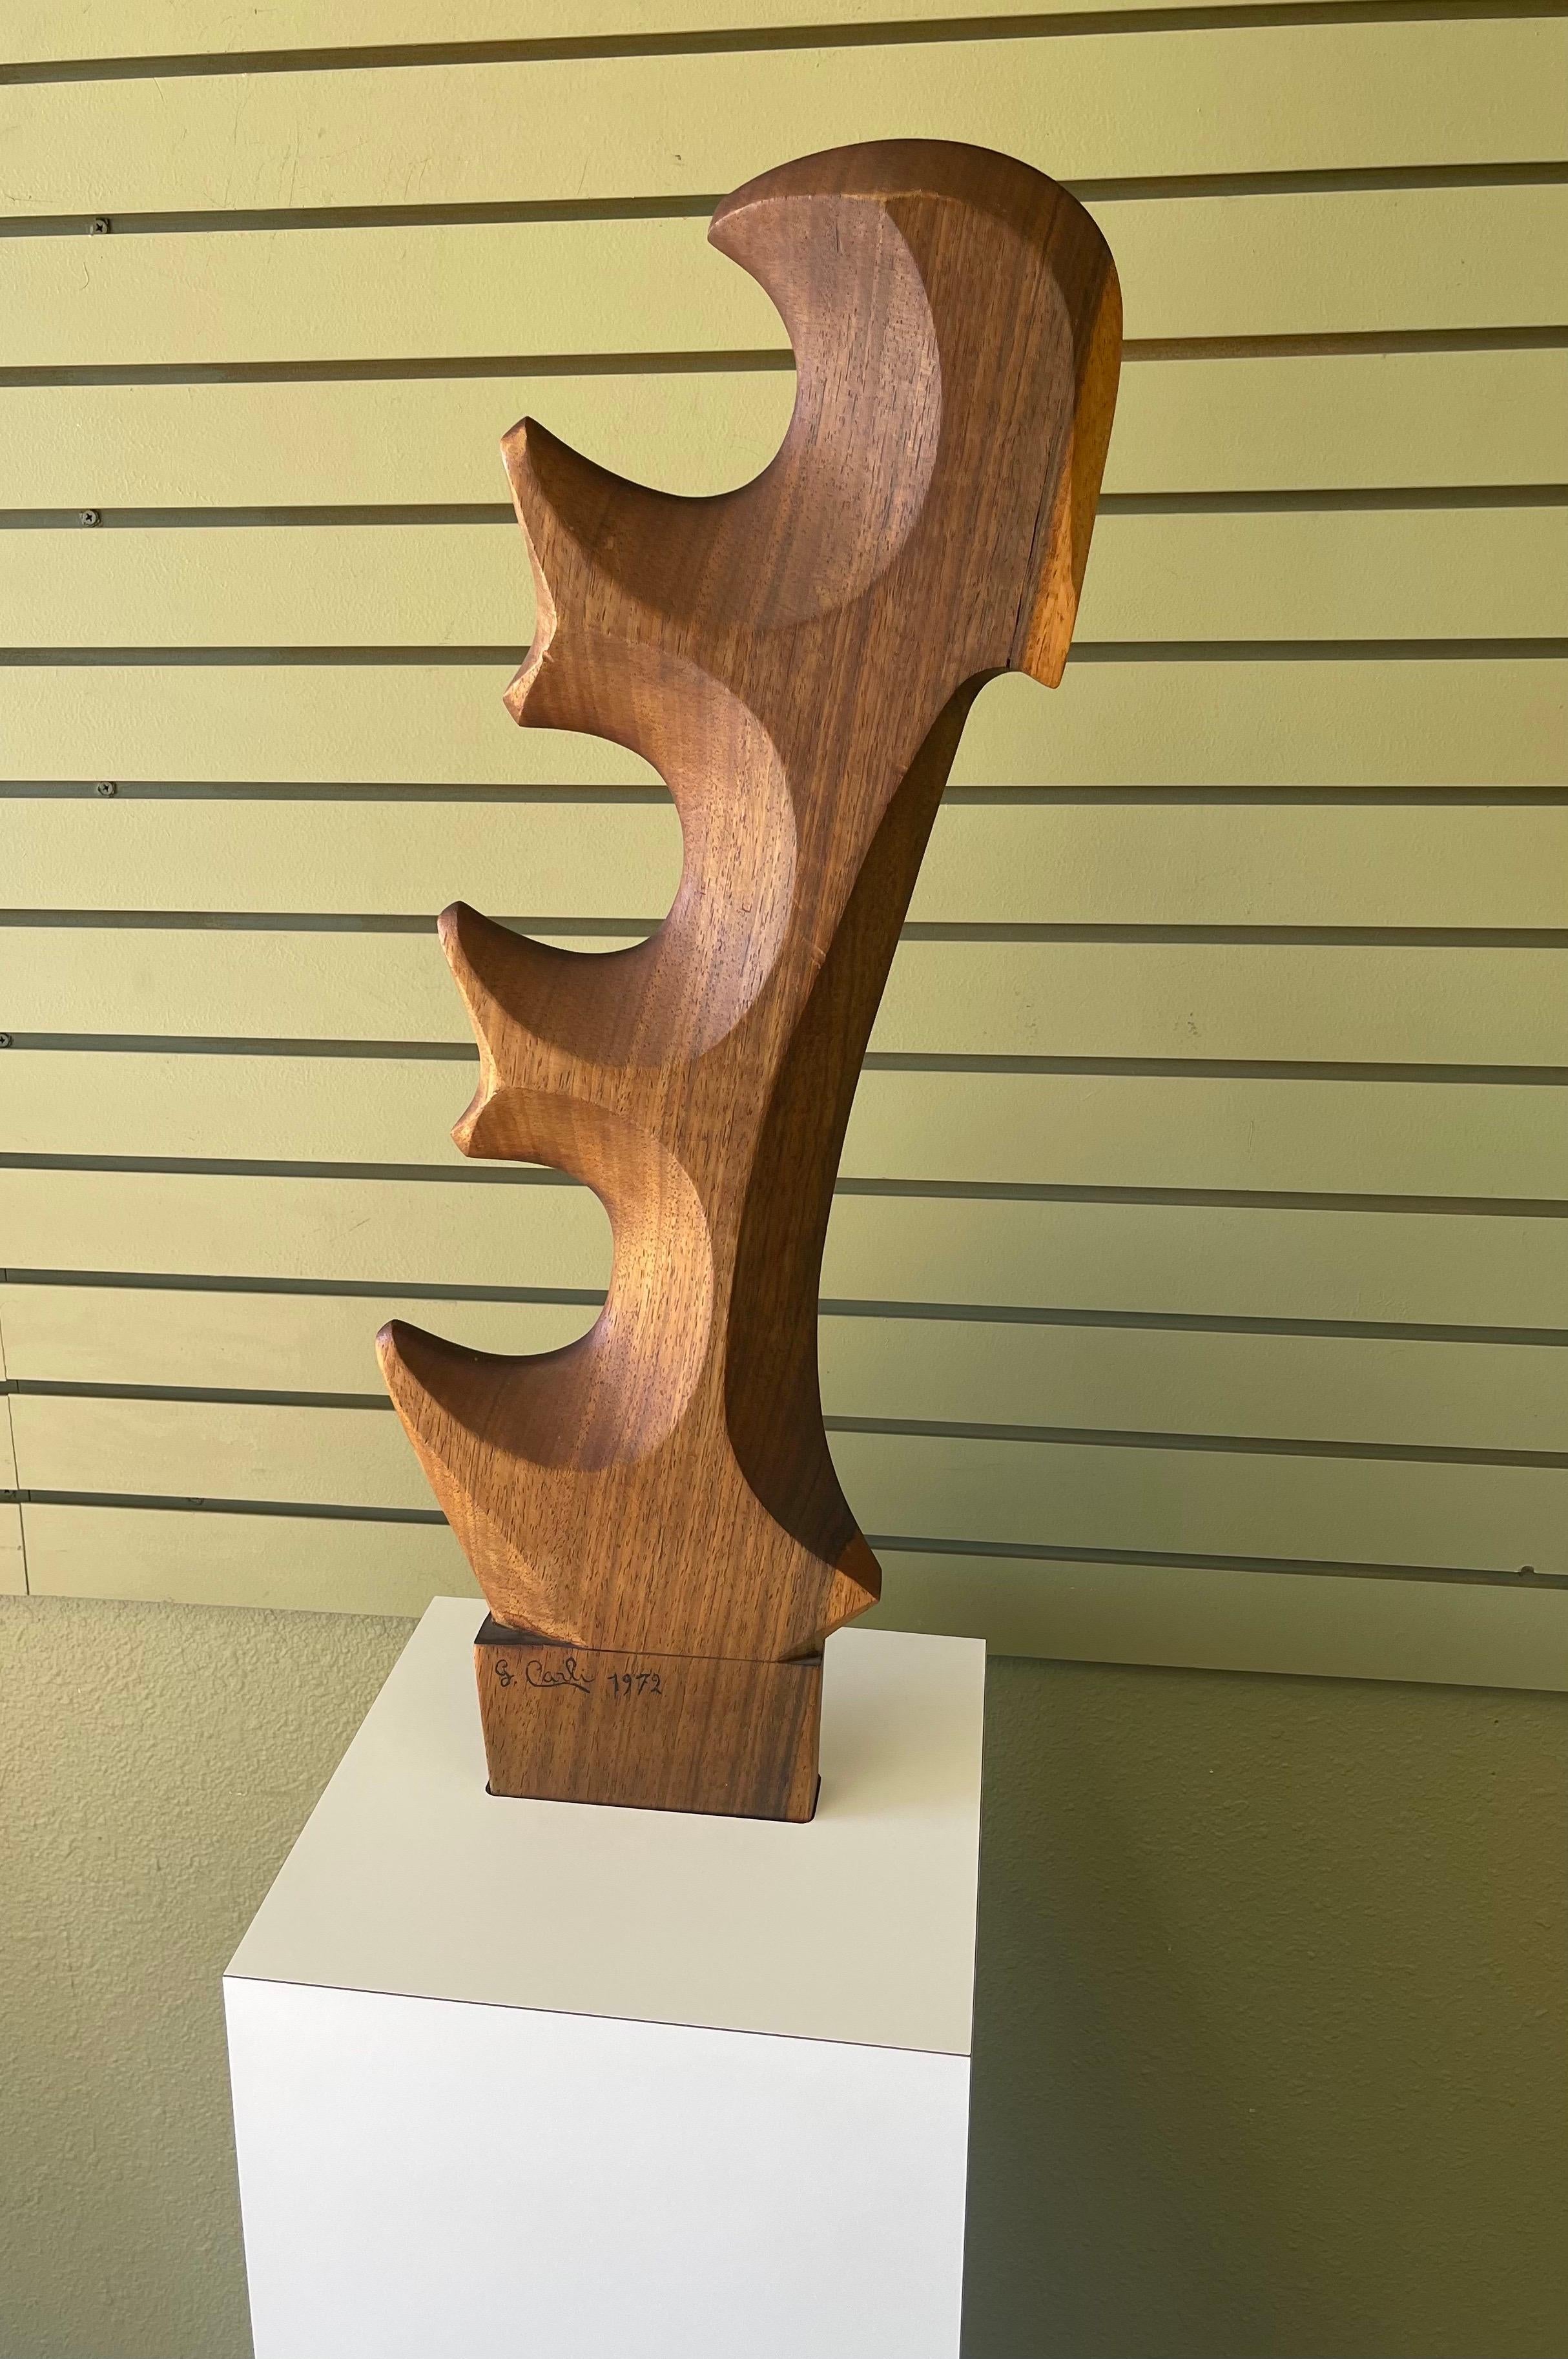 Massive Venetian Abstract Solid Walnut Forcola Sculpture by Giuseppe Carli For Sale 8